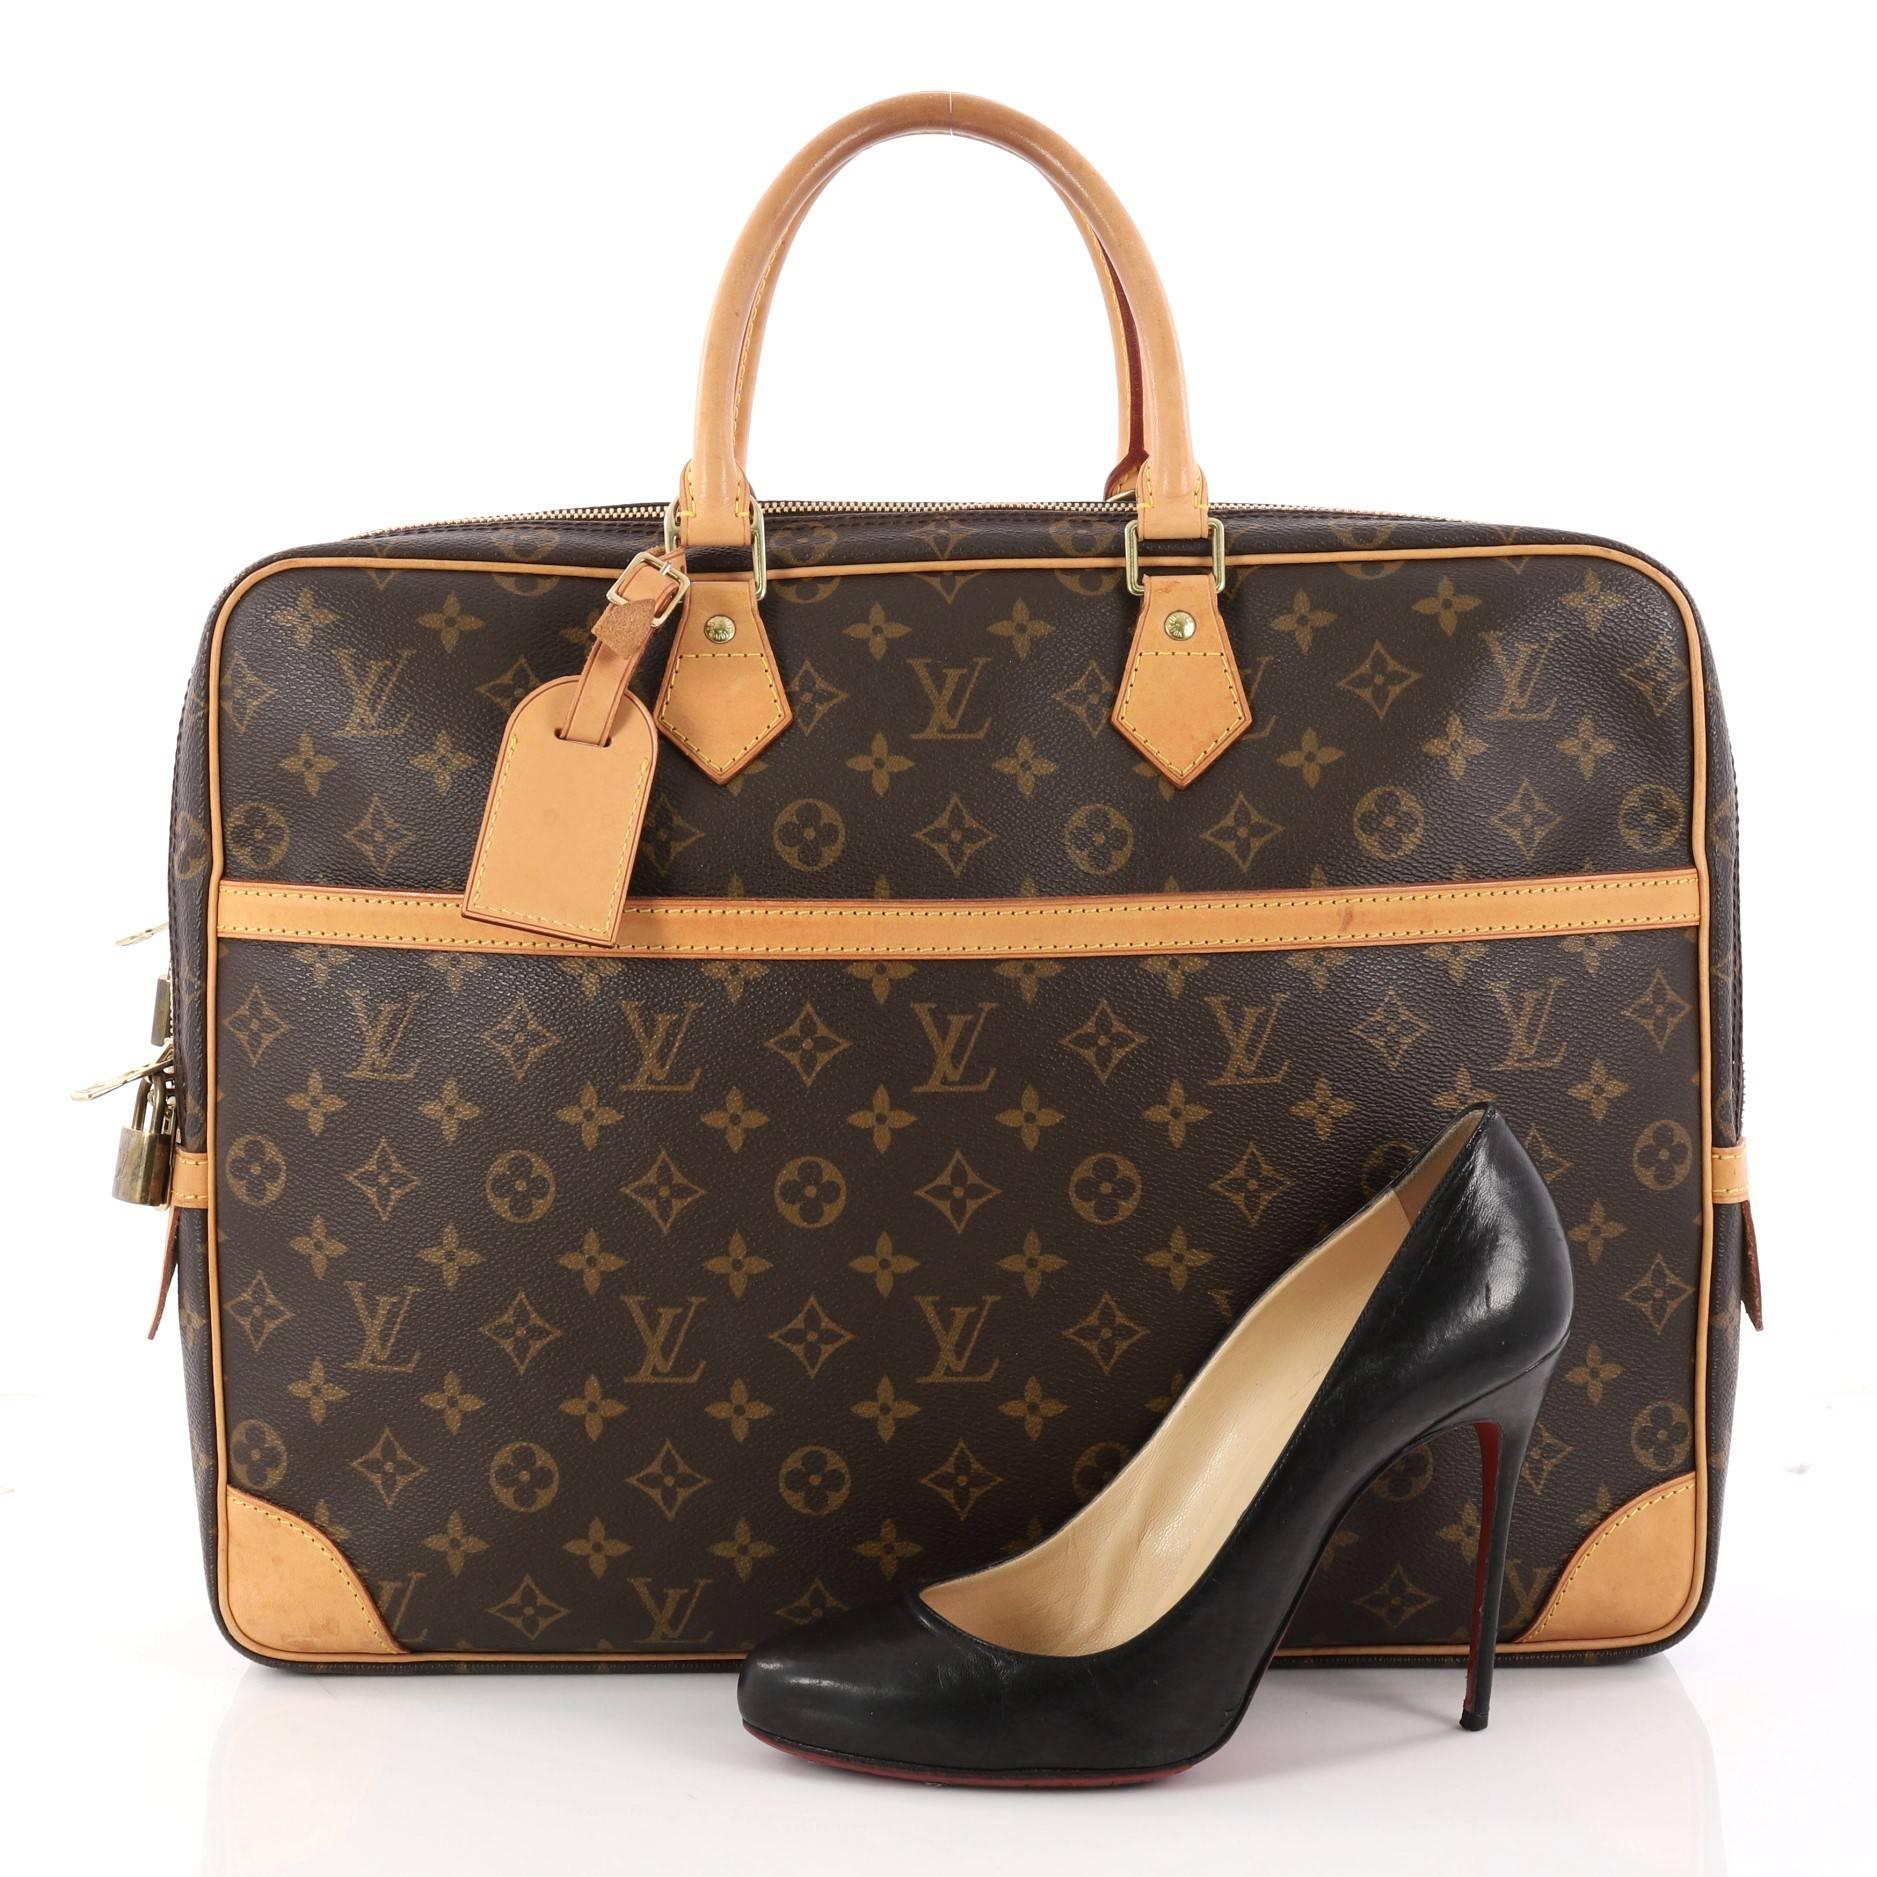 This authentic Louis Vuitton Porte-Documents Voyage Soft Compartment Briefcase Monogram Canvas showcases a classic briefcase silhouette. Crafted from the brand's classic brown monogram coated canvas, this luxurious briefcase features dual-rolled